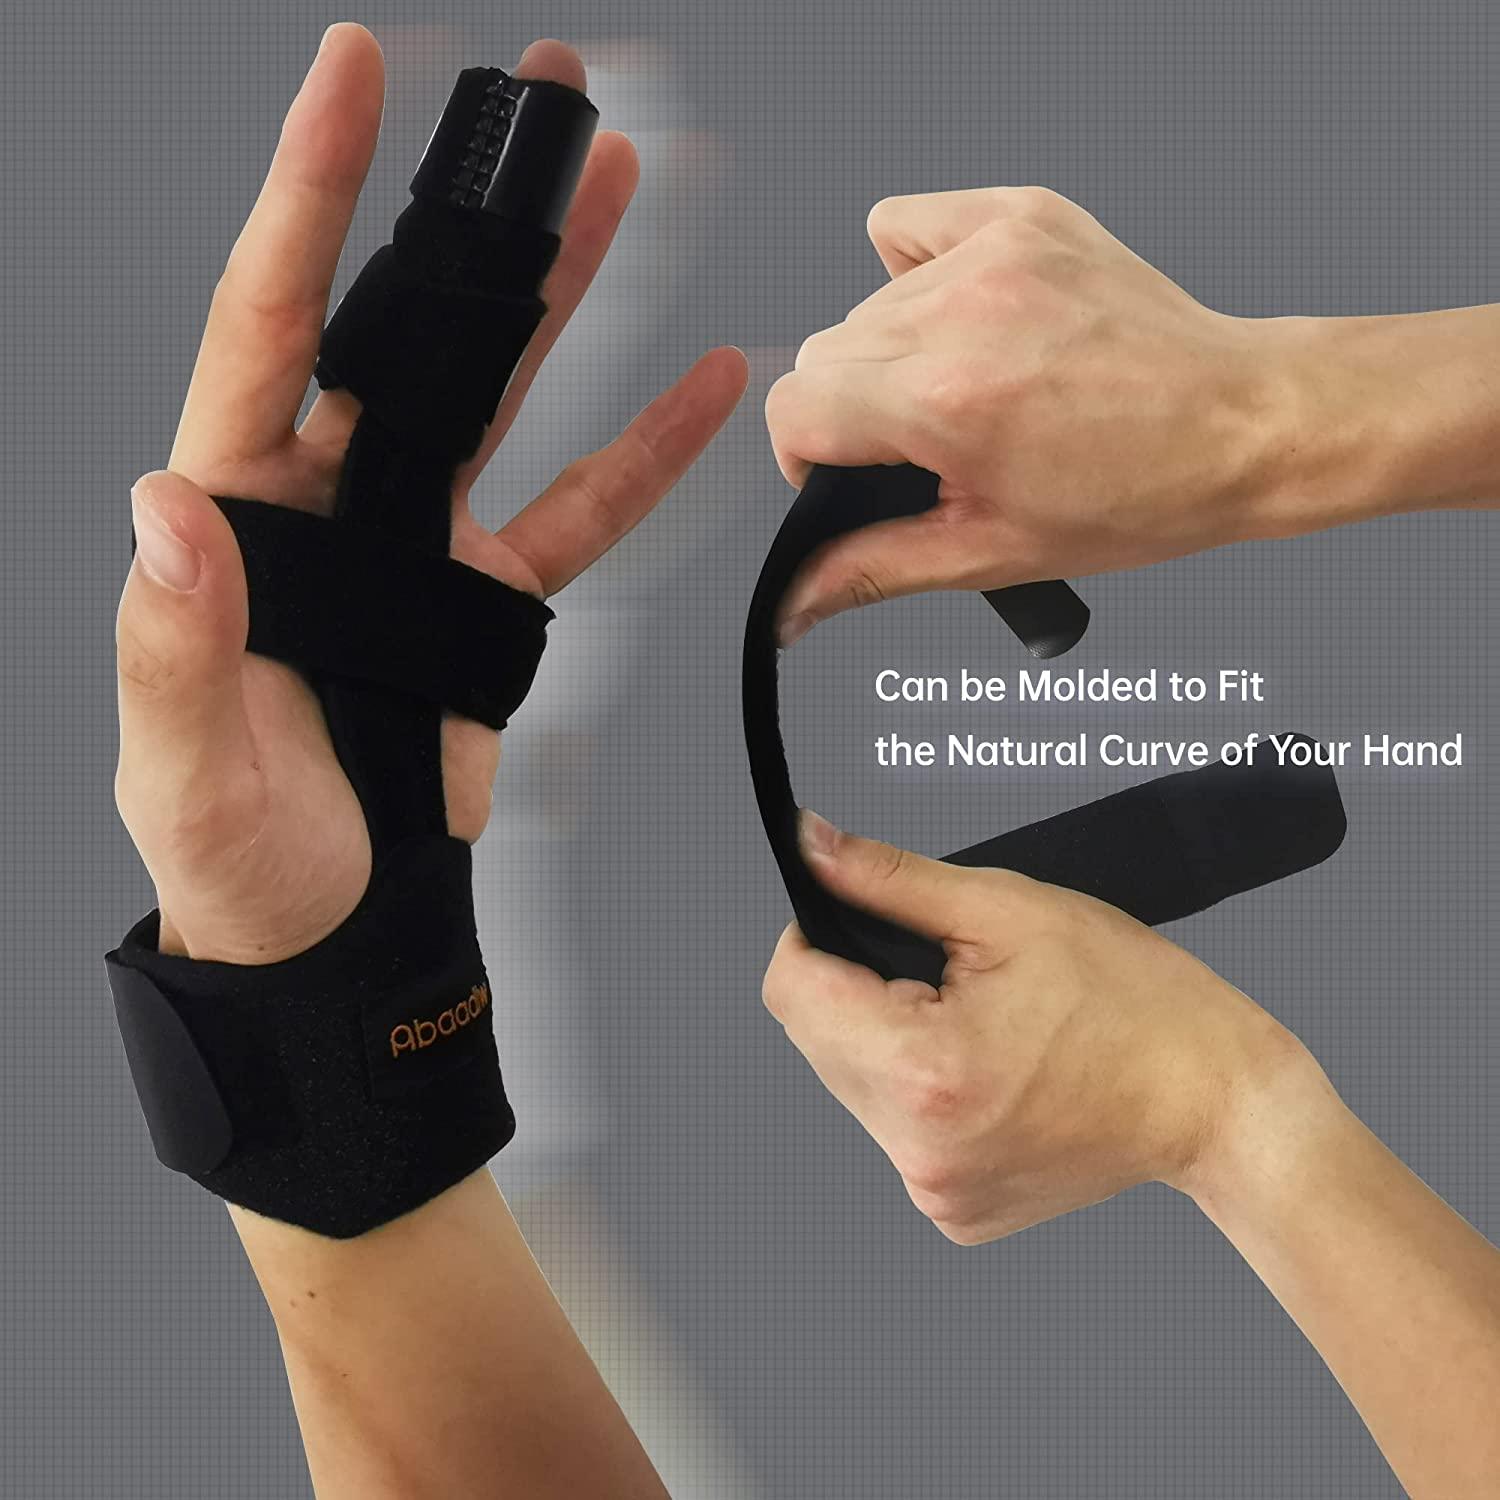 Buy Dr. Choice Original Trigger Finger Splint - 4 Pieces - Design Fits Index  Finger - Middle Finger - Ring Finger Online at Low Prices in India -  Amazon.in